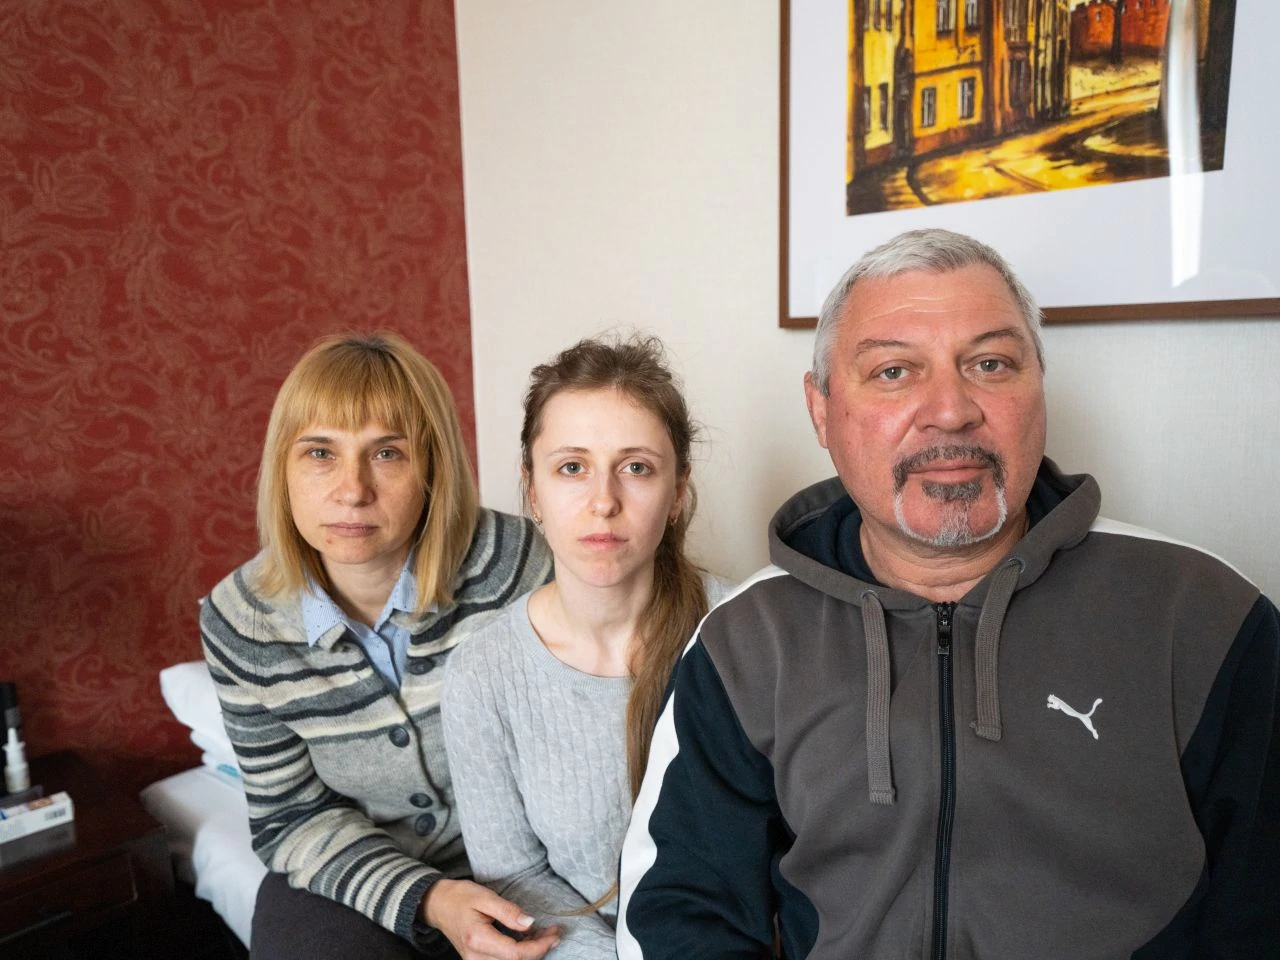 Alina (middle) poses for a photo with Olena (left) and Oleg (right), her mother-in-law and father-in-law, in a hotel in Krakow, Poland where she and her family are receiving displaced person’s assistance.